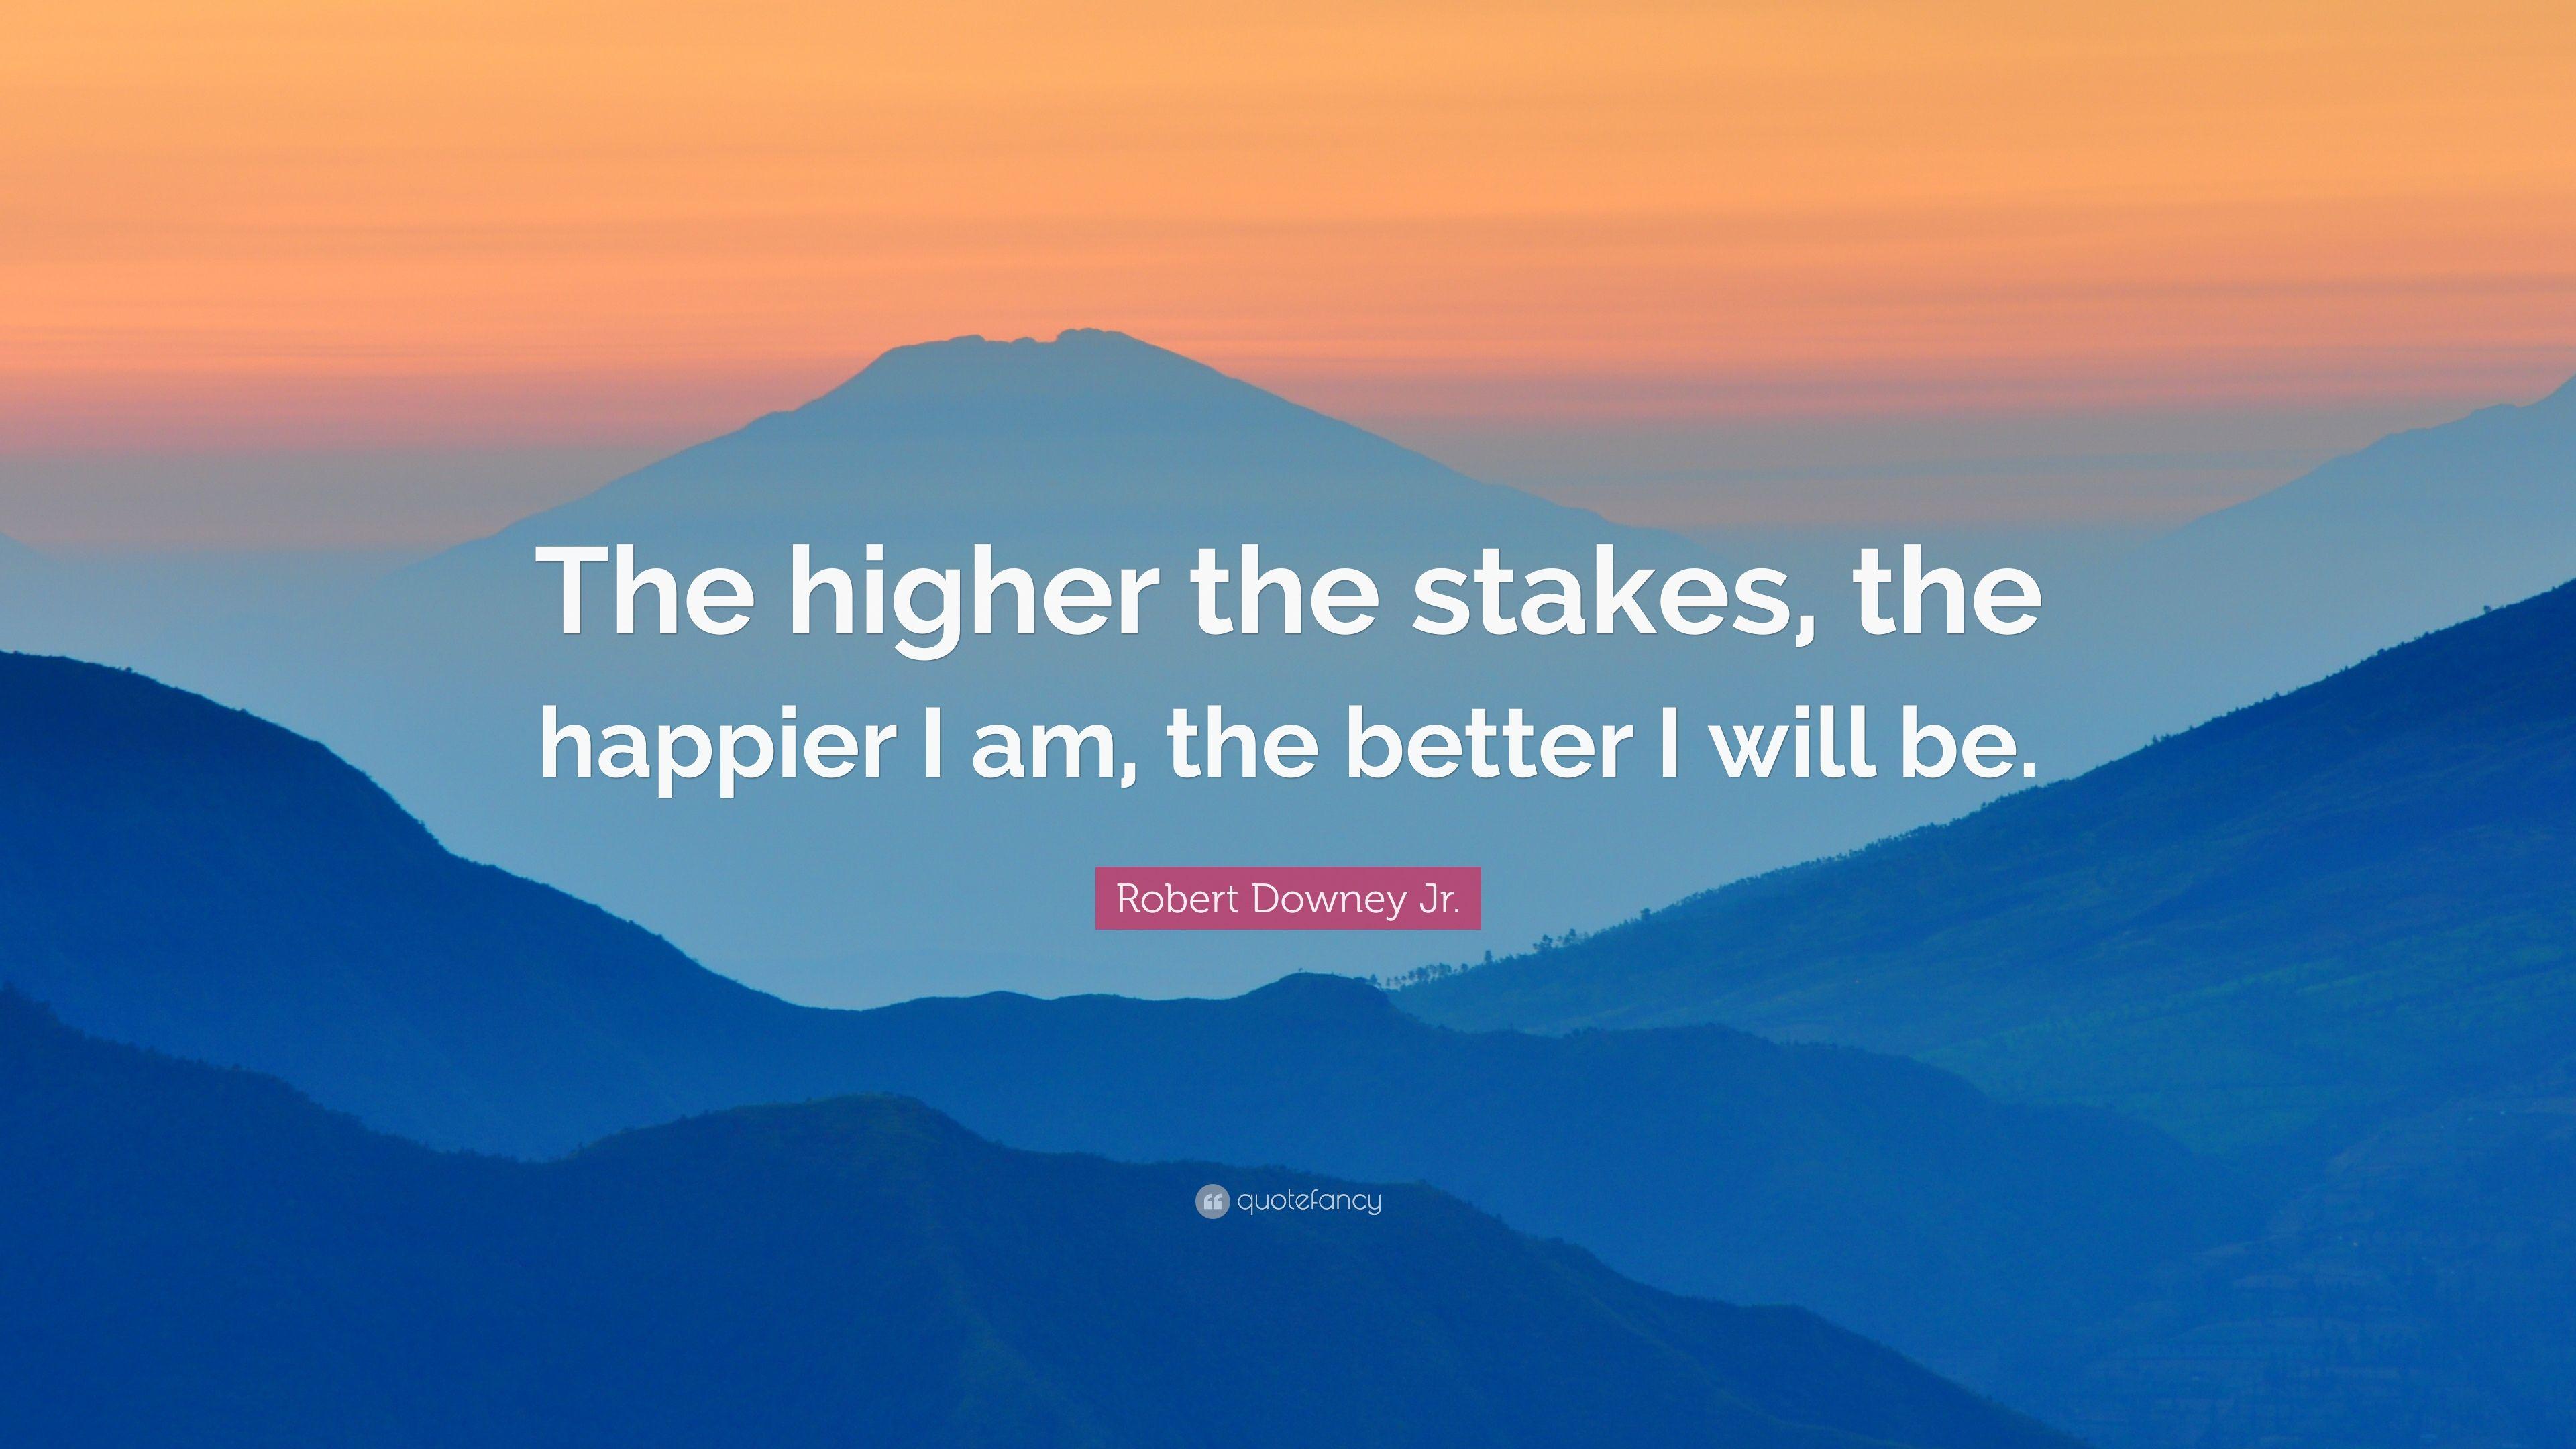 Robert Downey Jr. Quote: “The higher the stakes, the happier I am